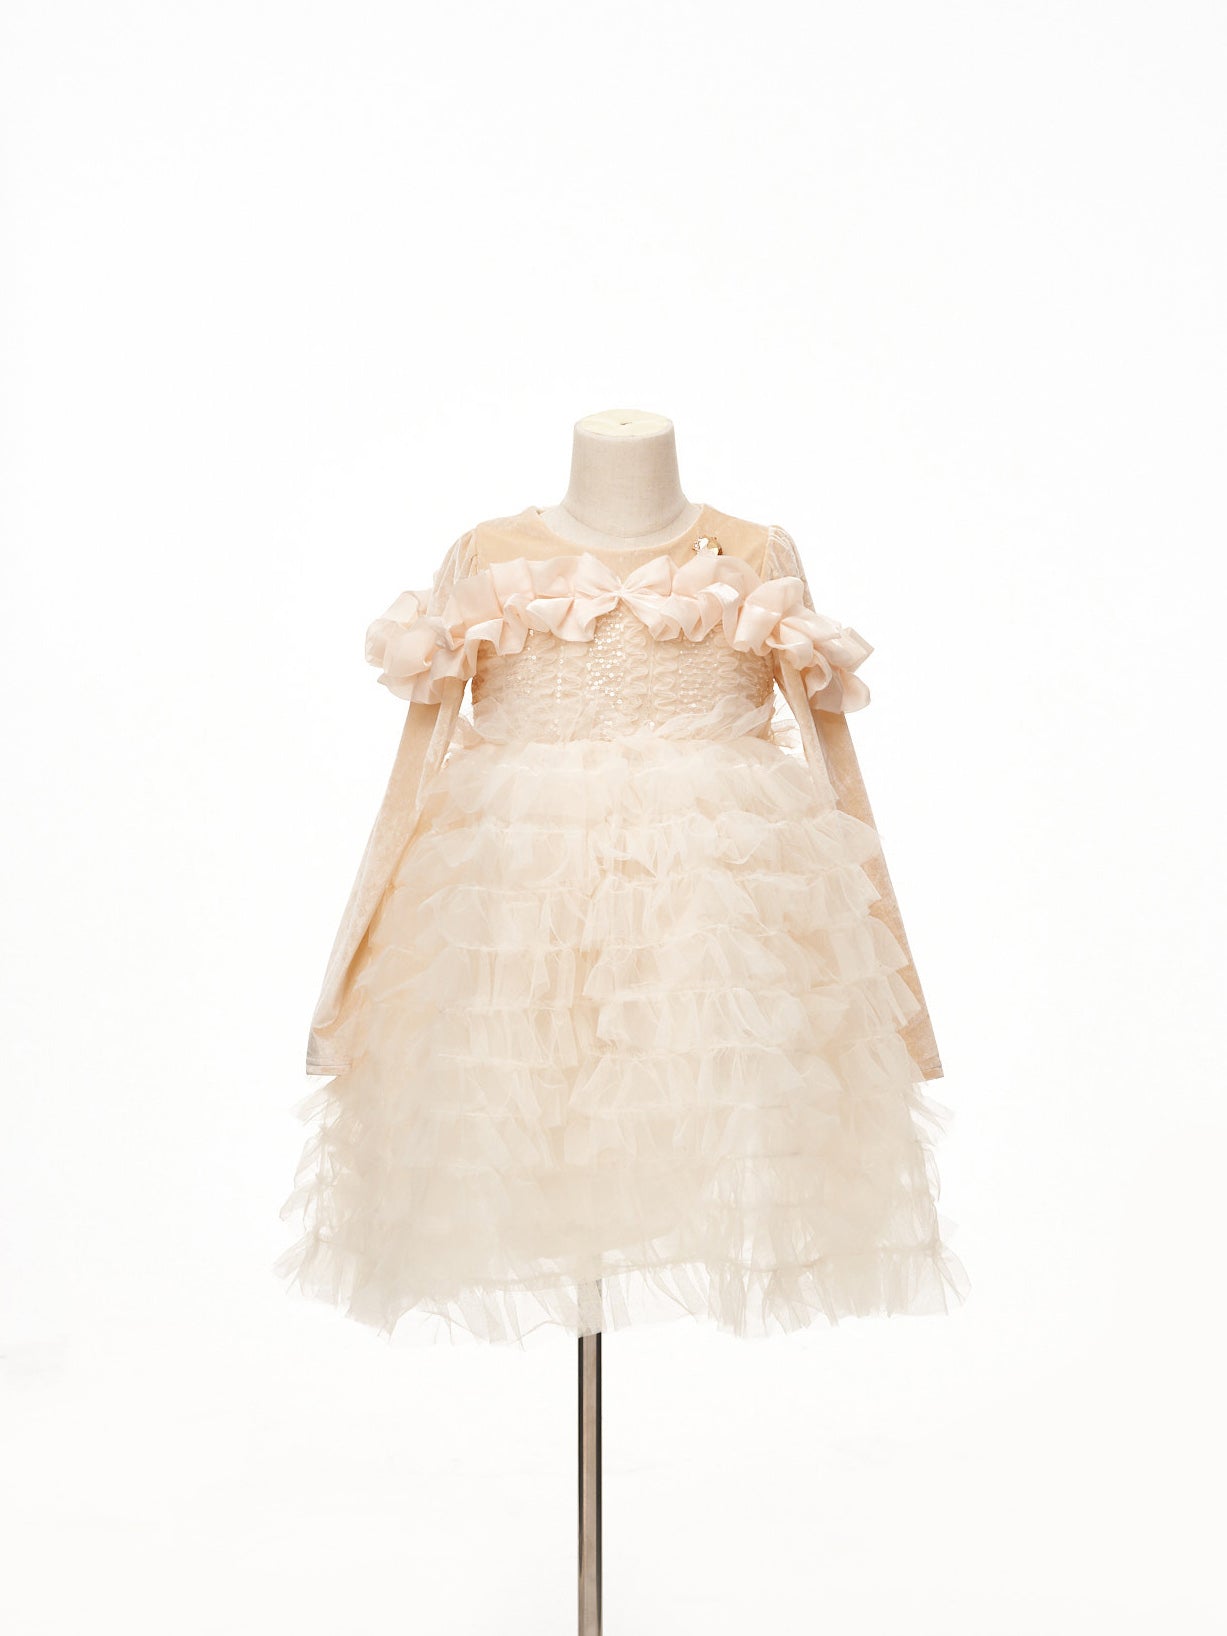 Kate Beige Tiered Kids Dress for Photography